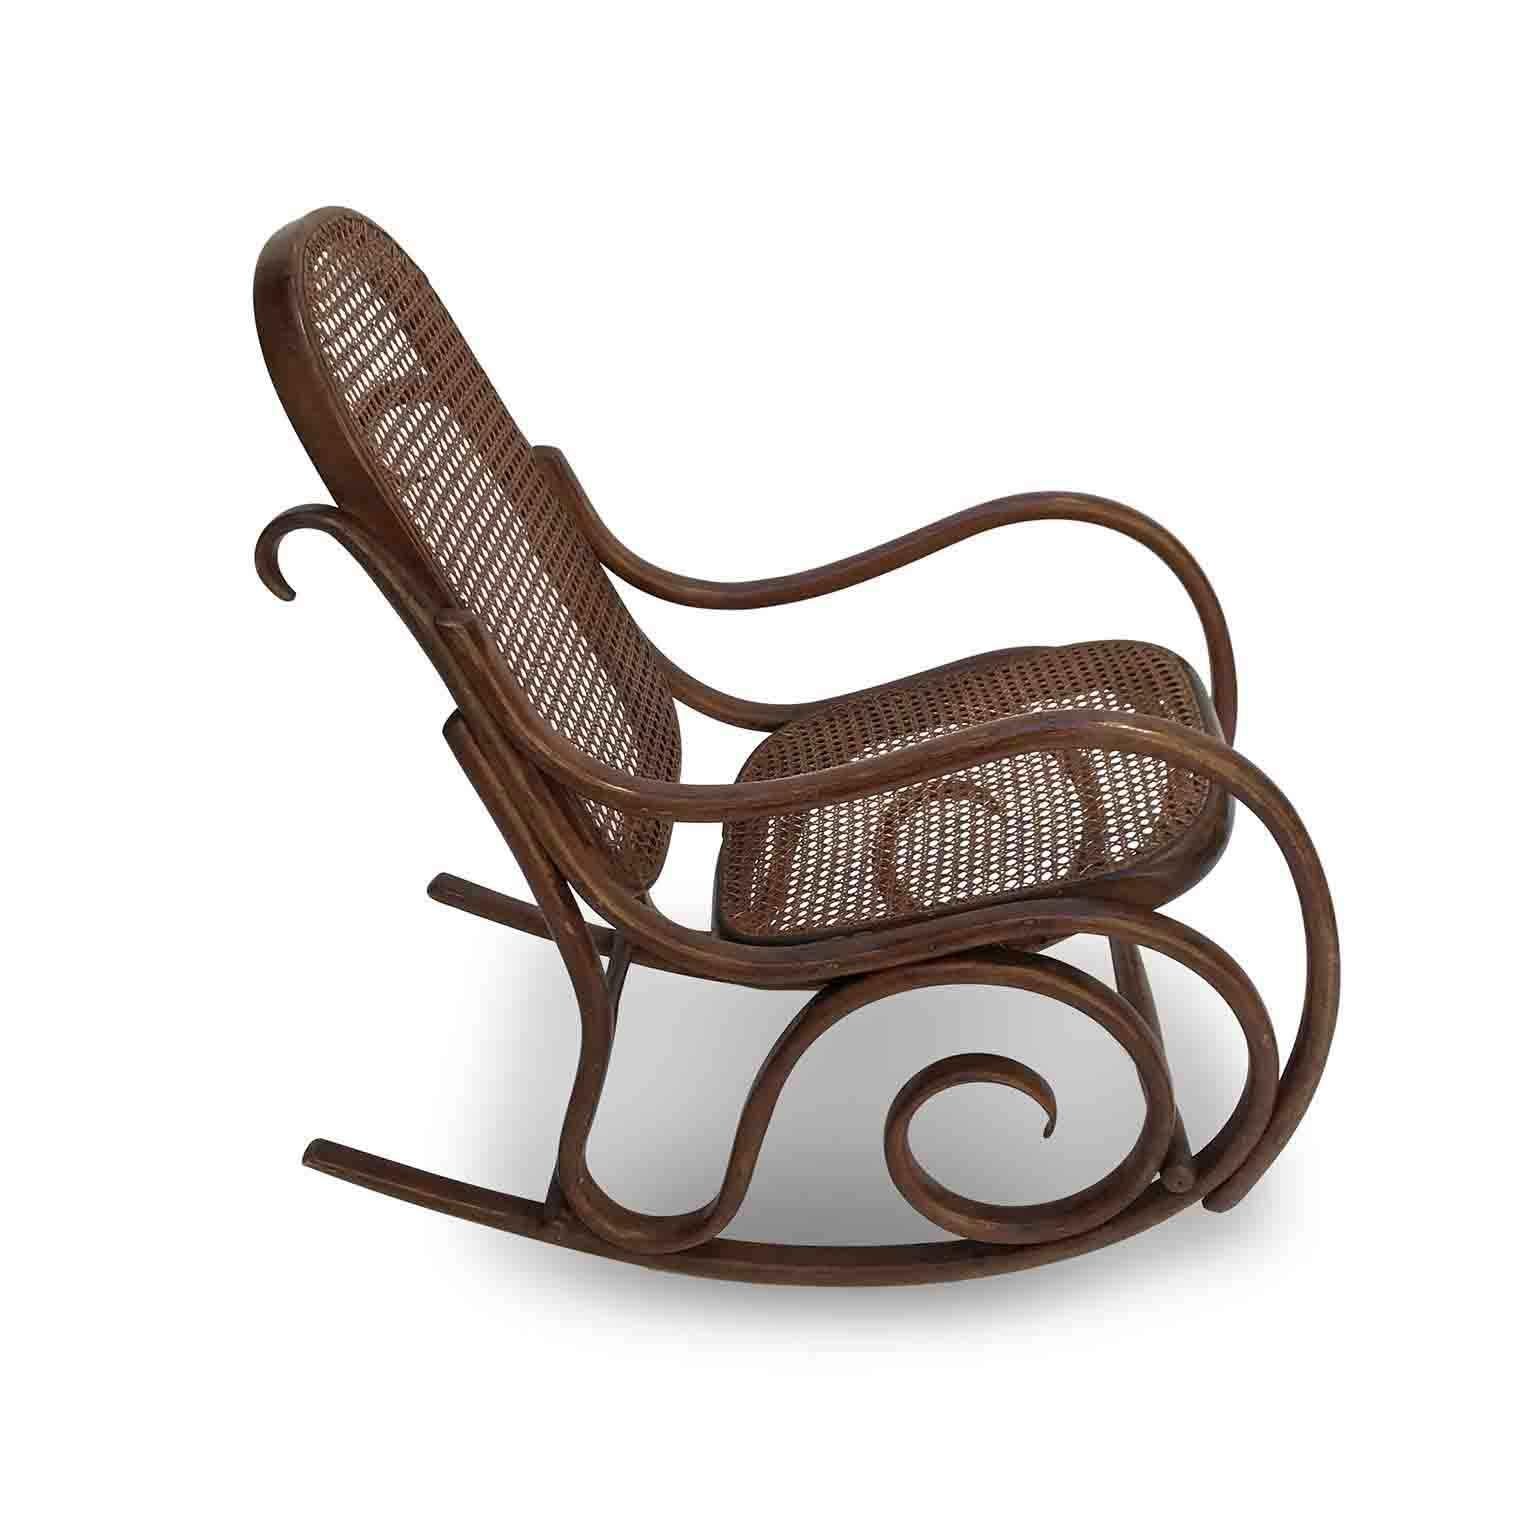 A lovely 20th century Thonet style beech bentwood child’s rocking chair with cane back and seat in fair age related condition, featuring bent curls and a beautiful original patina. A minor cane small defect in the upper profile and a crack in the